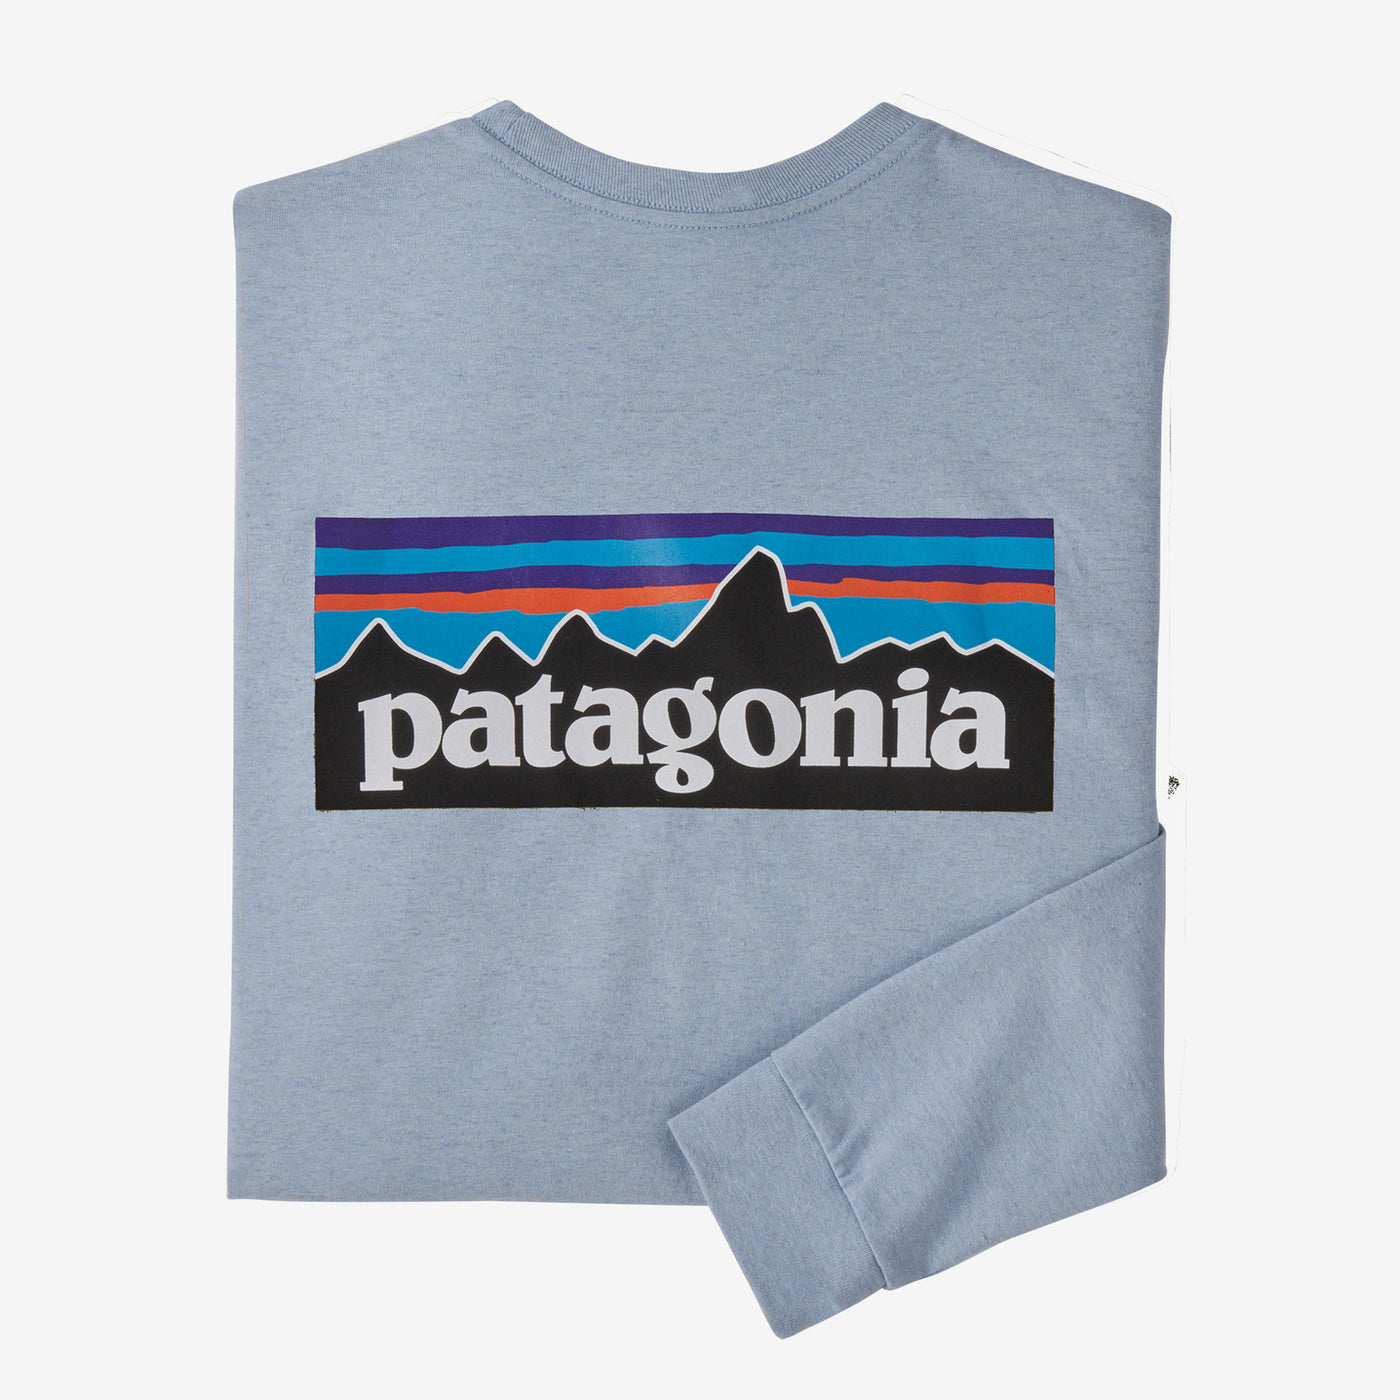 Patagonia Men's Long Sleeve P-6 Logo Responsibili-Tee T-Shirt-Men's Clothing-STEAM BLUE-S-Kevin's Fine Outdoor Gear & Apparel